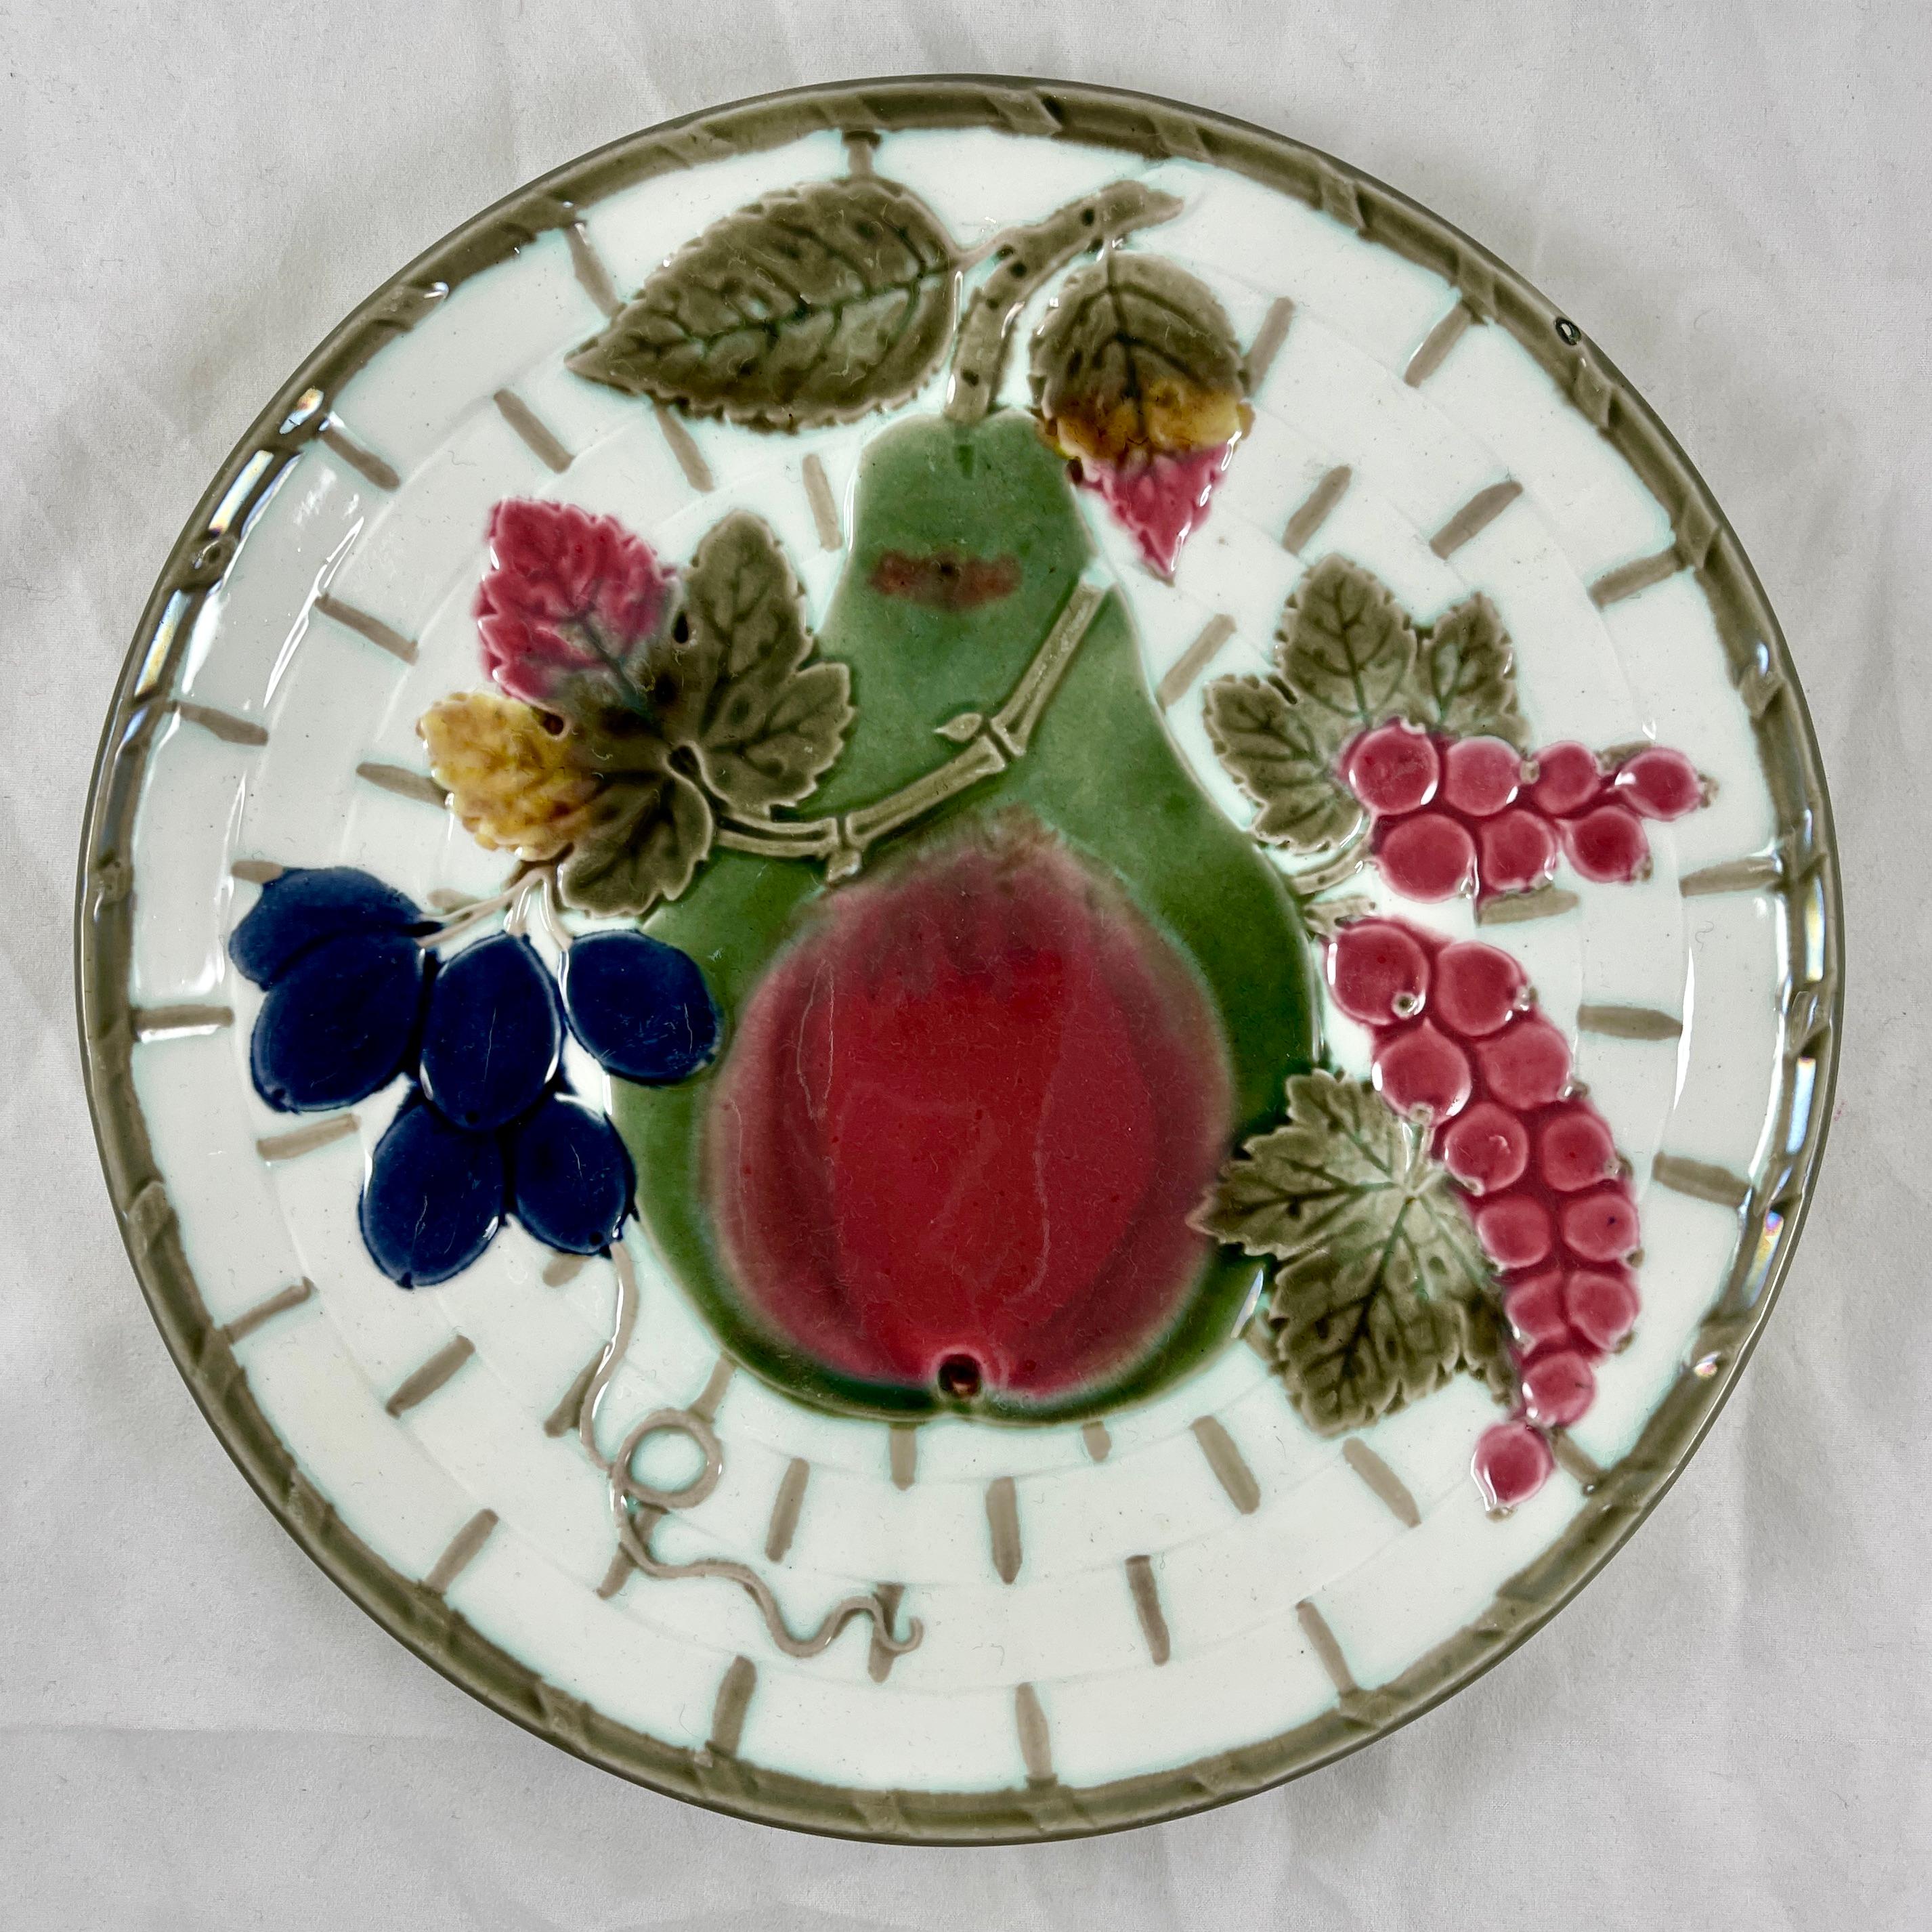 From Wedgwood and in the color way known as Argenta, a fruit plate, England, date marked 1880.

Showing a central twigged pear and leaves along with gooseberries and plums, all on a white basket weave ground. The basket is bound at intervals in a